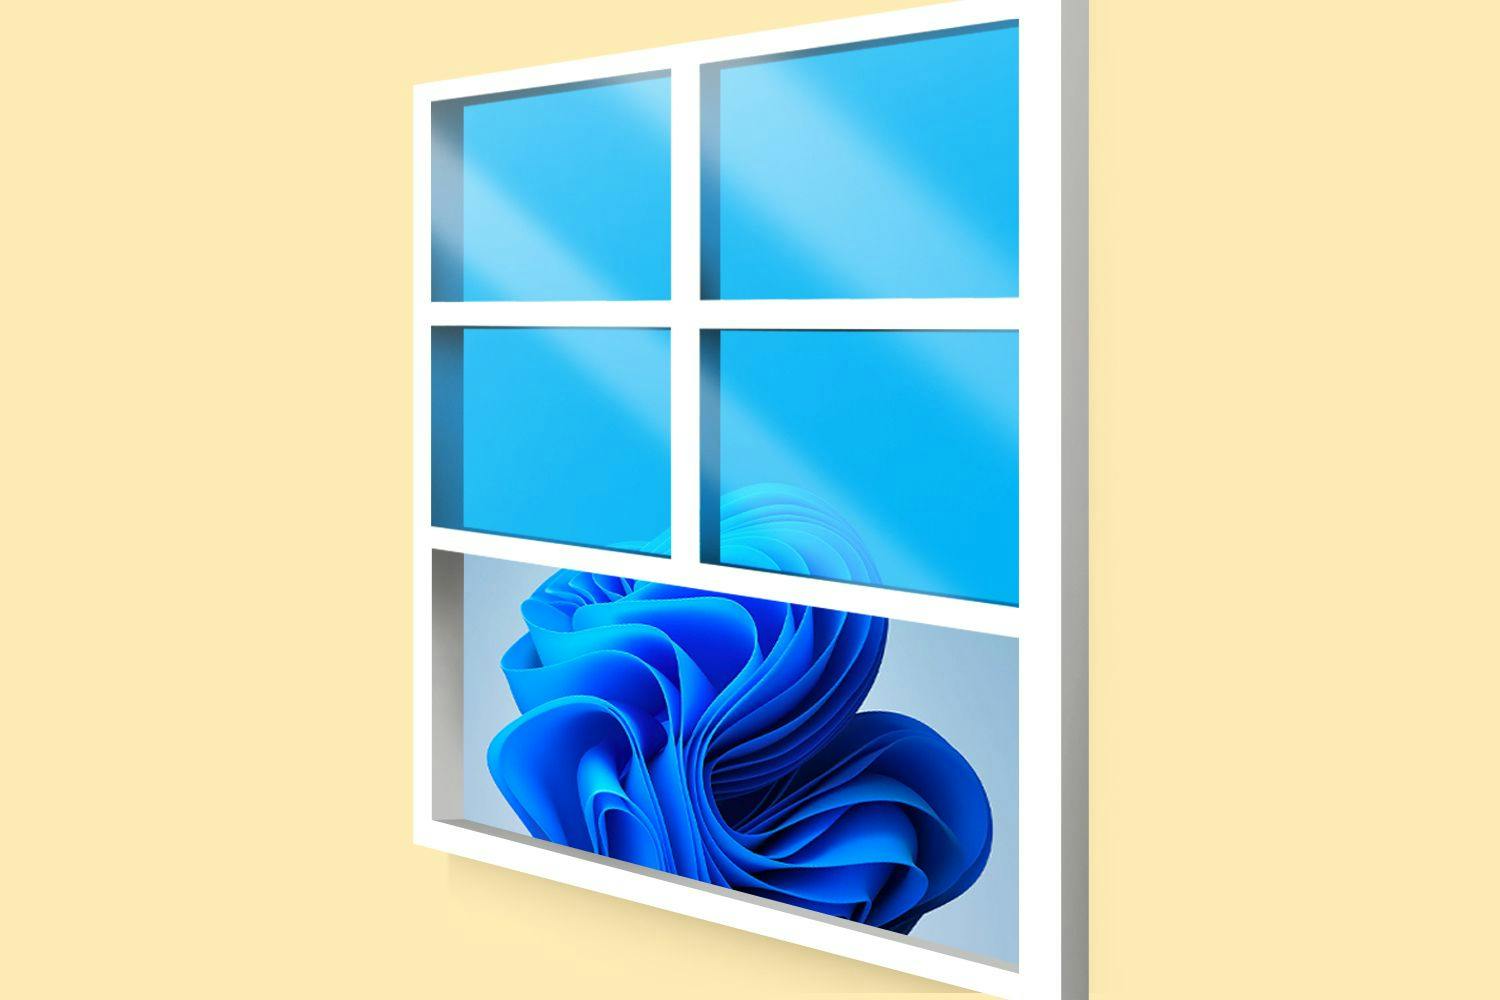 An illustration of a white window with blue paned glass in front of a yellow background. The top four panes are made to look like Microsoft's slanted, rectangular Windows logo, and peeping out through the open part of the window is a swirly blue background.